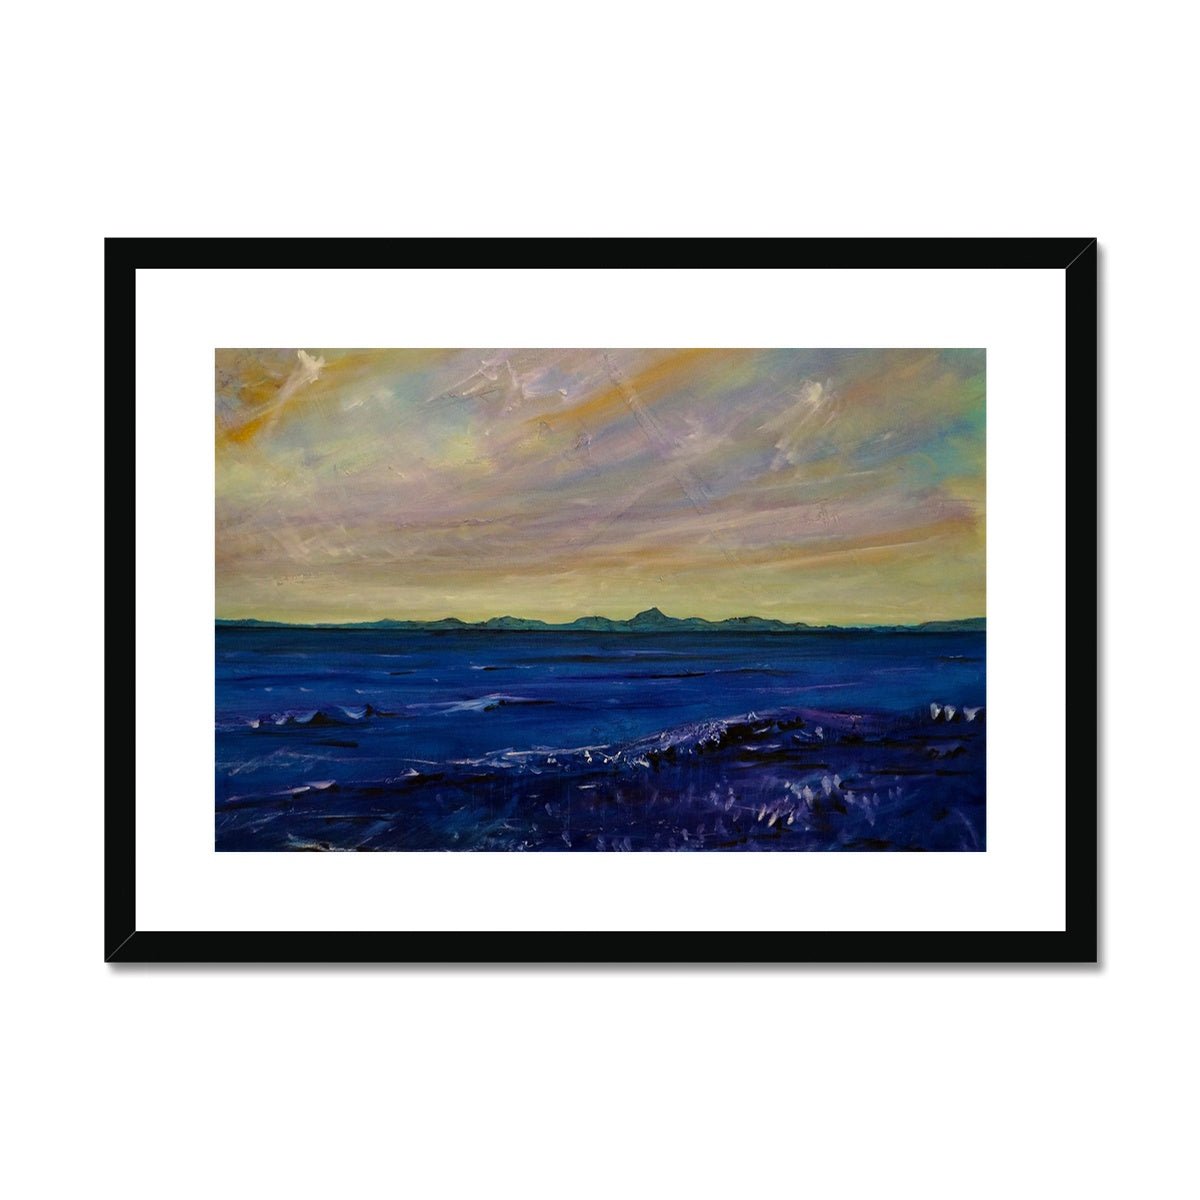 Jura Painting | Framed & Mounted Prints From Scotland-Framed & Mounted Prints-Hebridean Islands Art Gallery-A2 Landscape-Black Frame-Paintings, Prints, Homeware, Art Gifts From Scotland By Scottish Artist Kevin Hunter